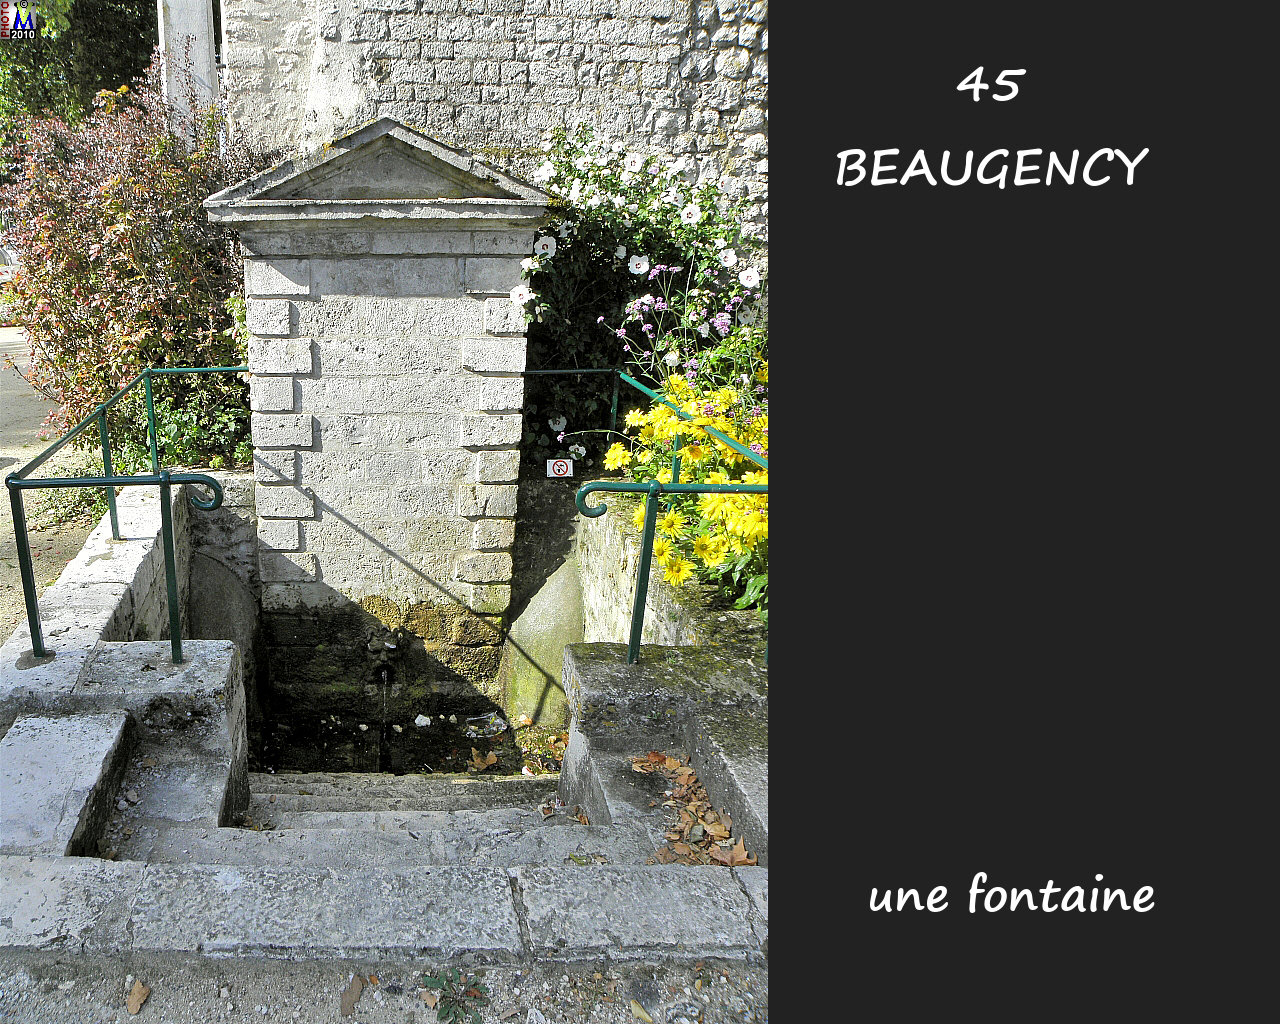 45BEAUGENCY_fontaine_100.jpg